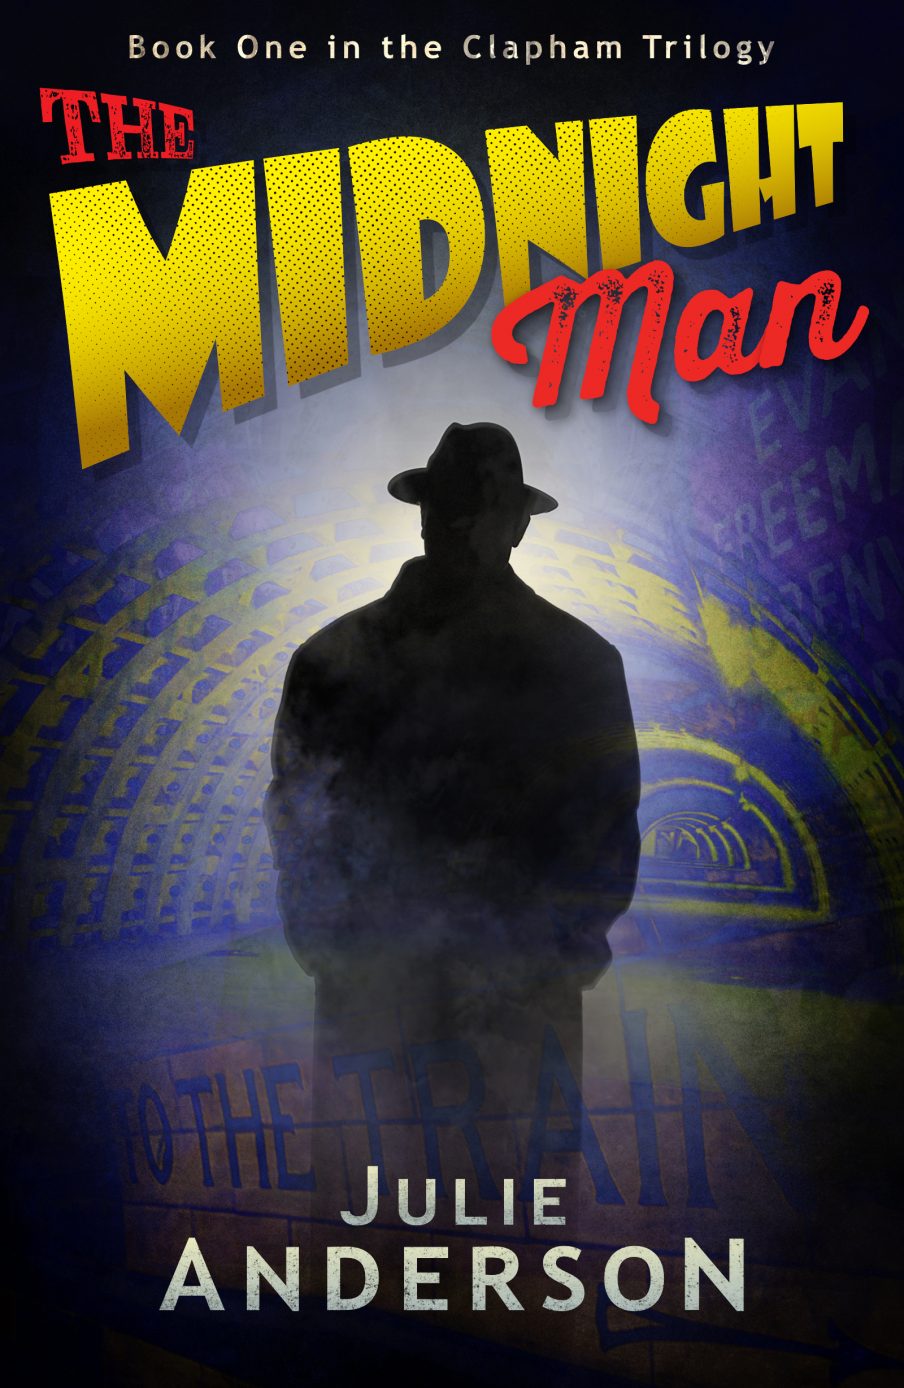 Image shows the cover of The Midnight Man by Julie Anderson.